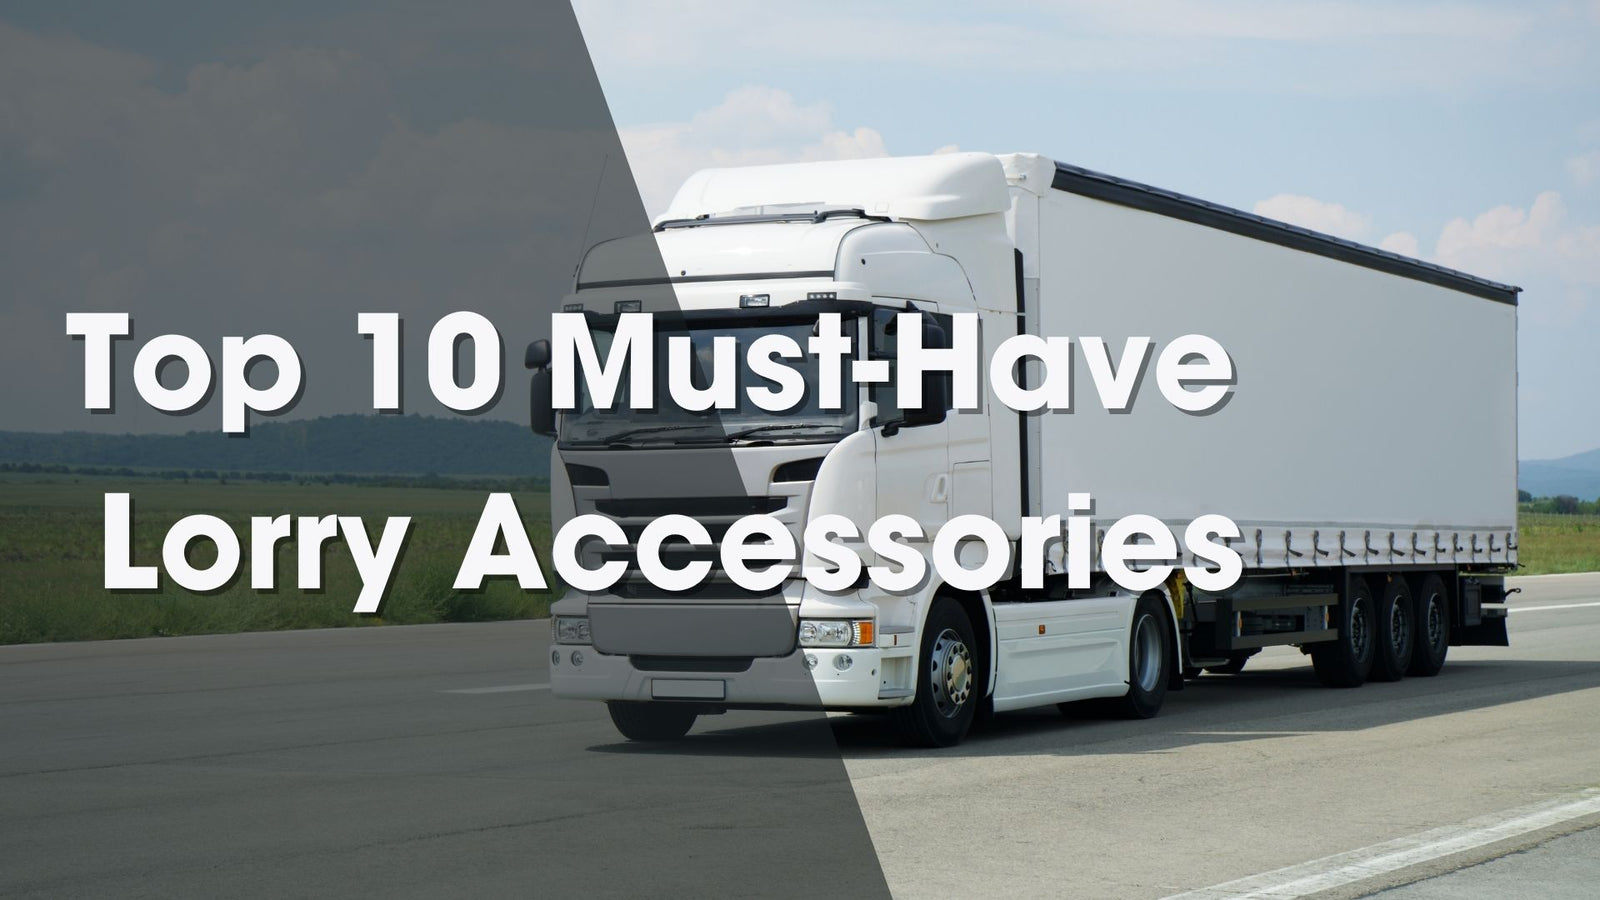 A Comprehensive Guide to the Top 10 Must-Have Lorry Accessories